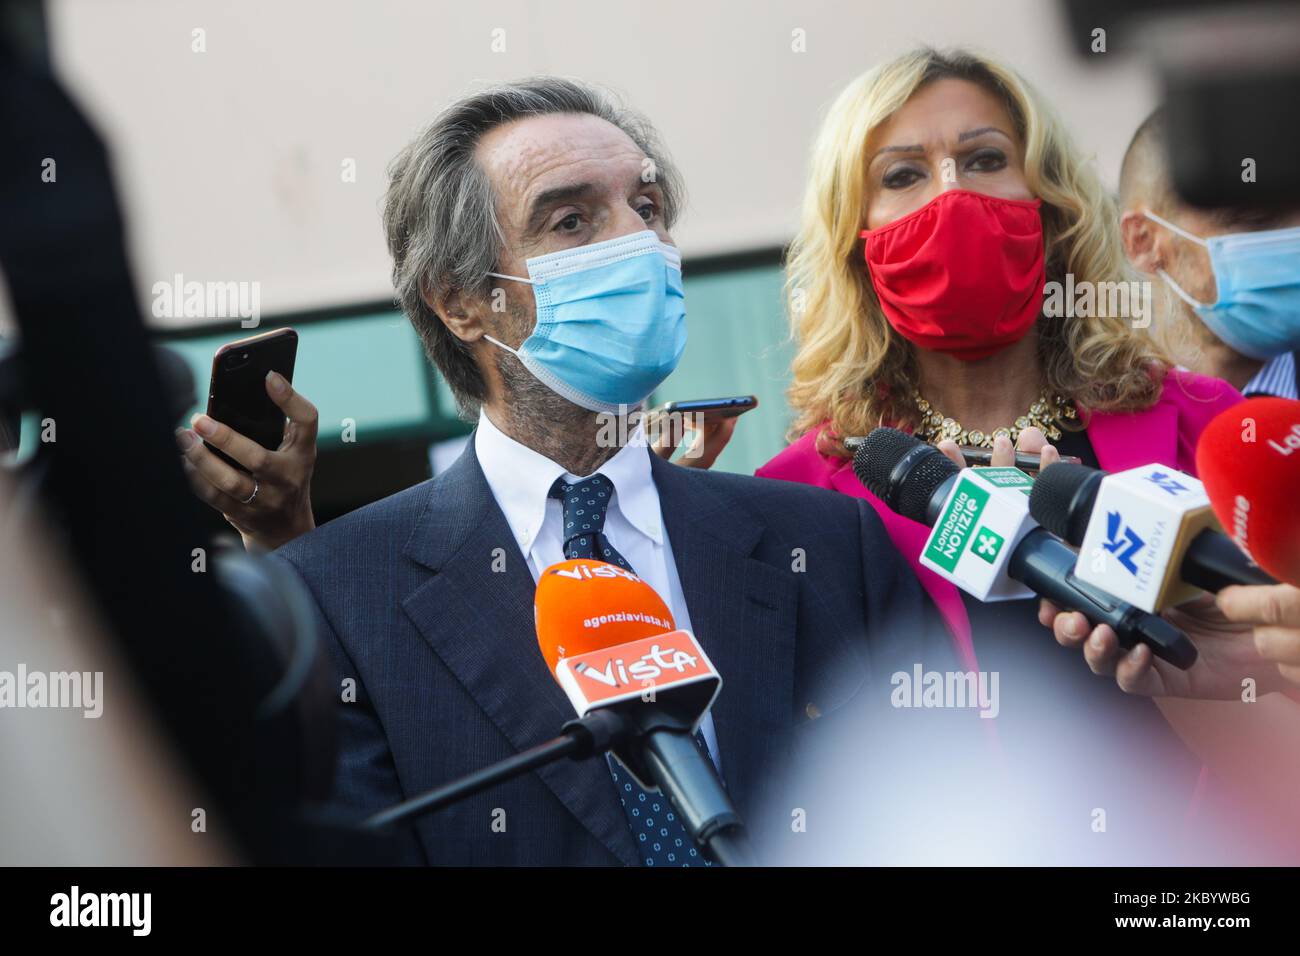 The President of Lombardy Region Attilio Fontana speaks to journalists during the visit to the Lagrange Institute in Milan during the reopening of schools after the forced closure due to the Coronavirus emergency in Italy, Milan, on September 14, 2020 (Photo by Mairo Cinquetti/NurPhoto) Stock Photo